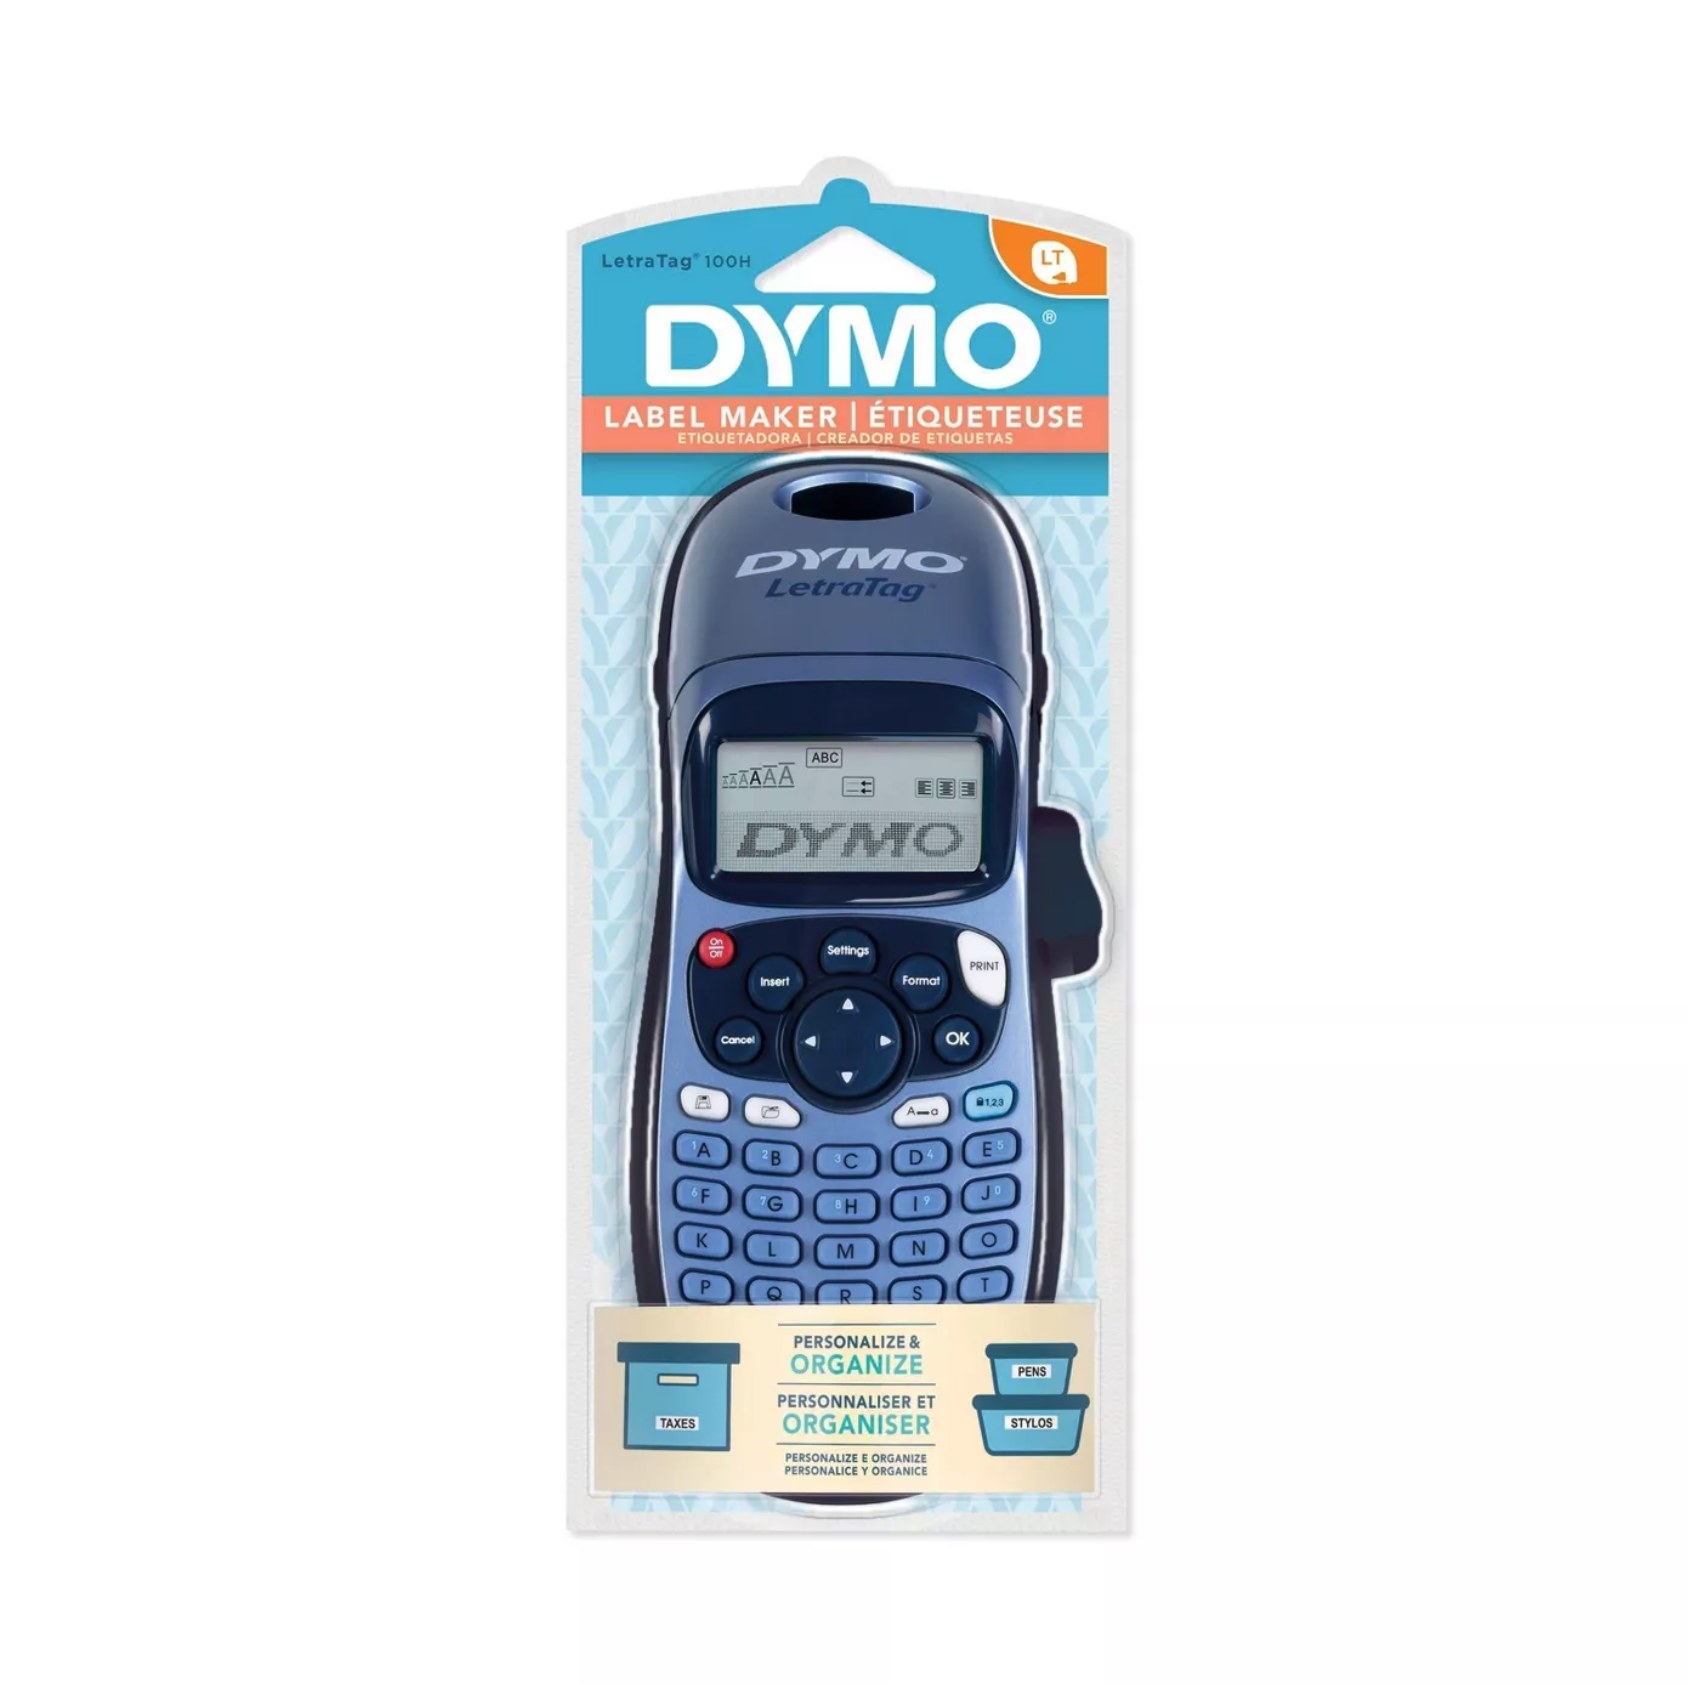 A Dymo Label Maker in its packaging